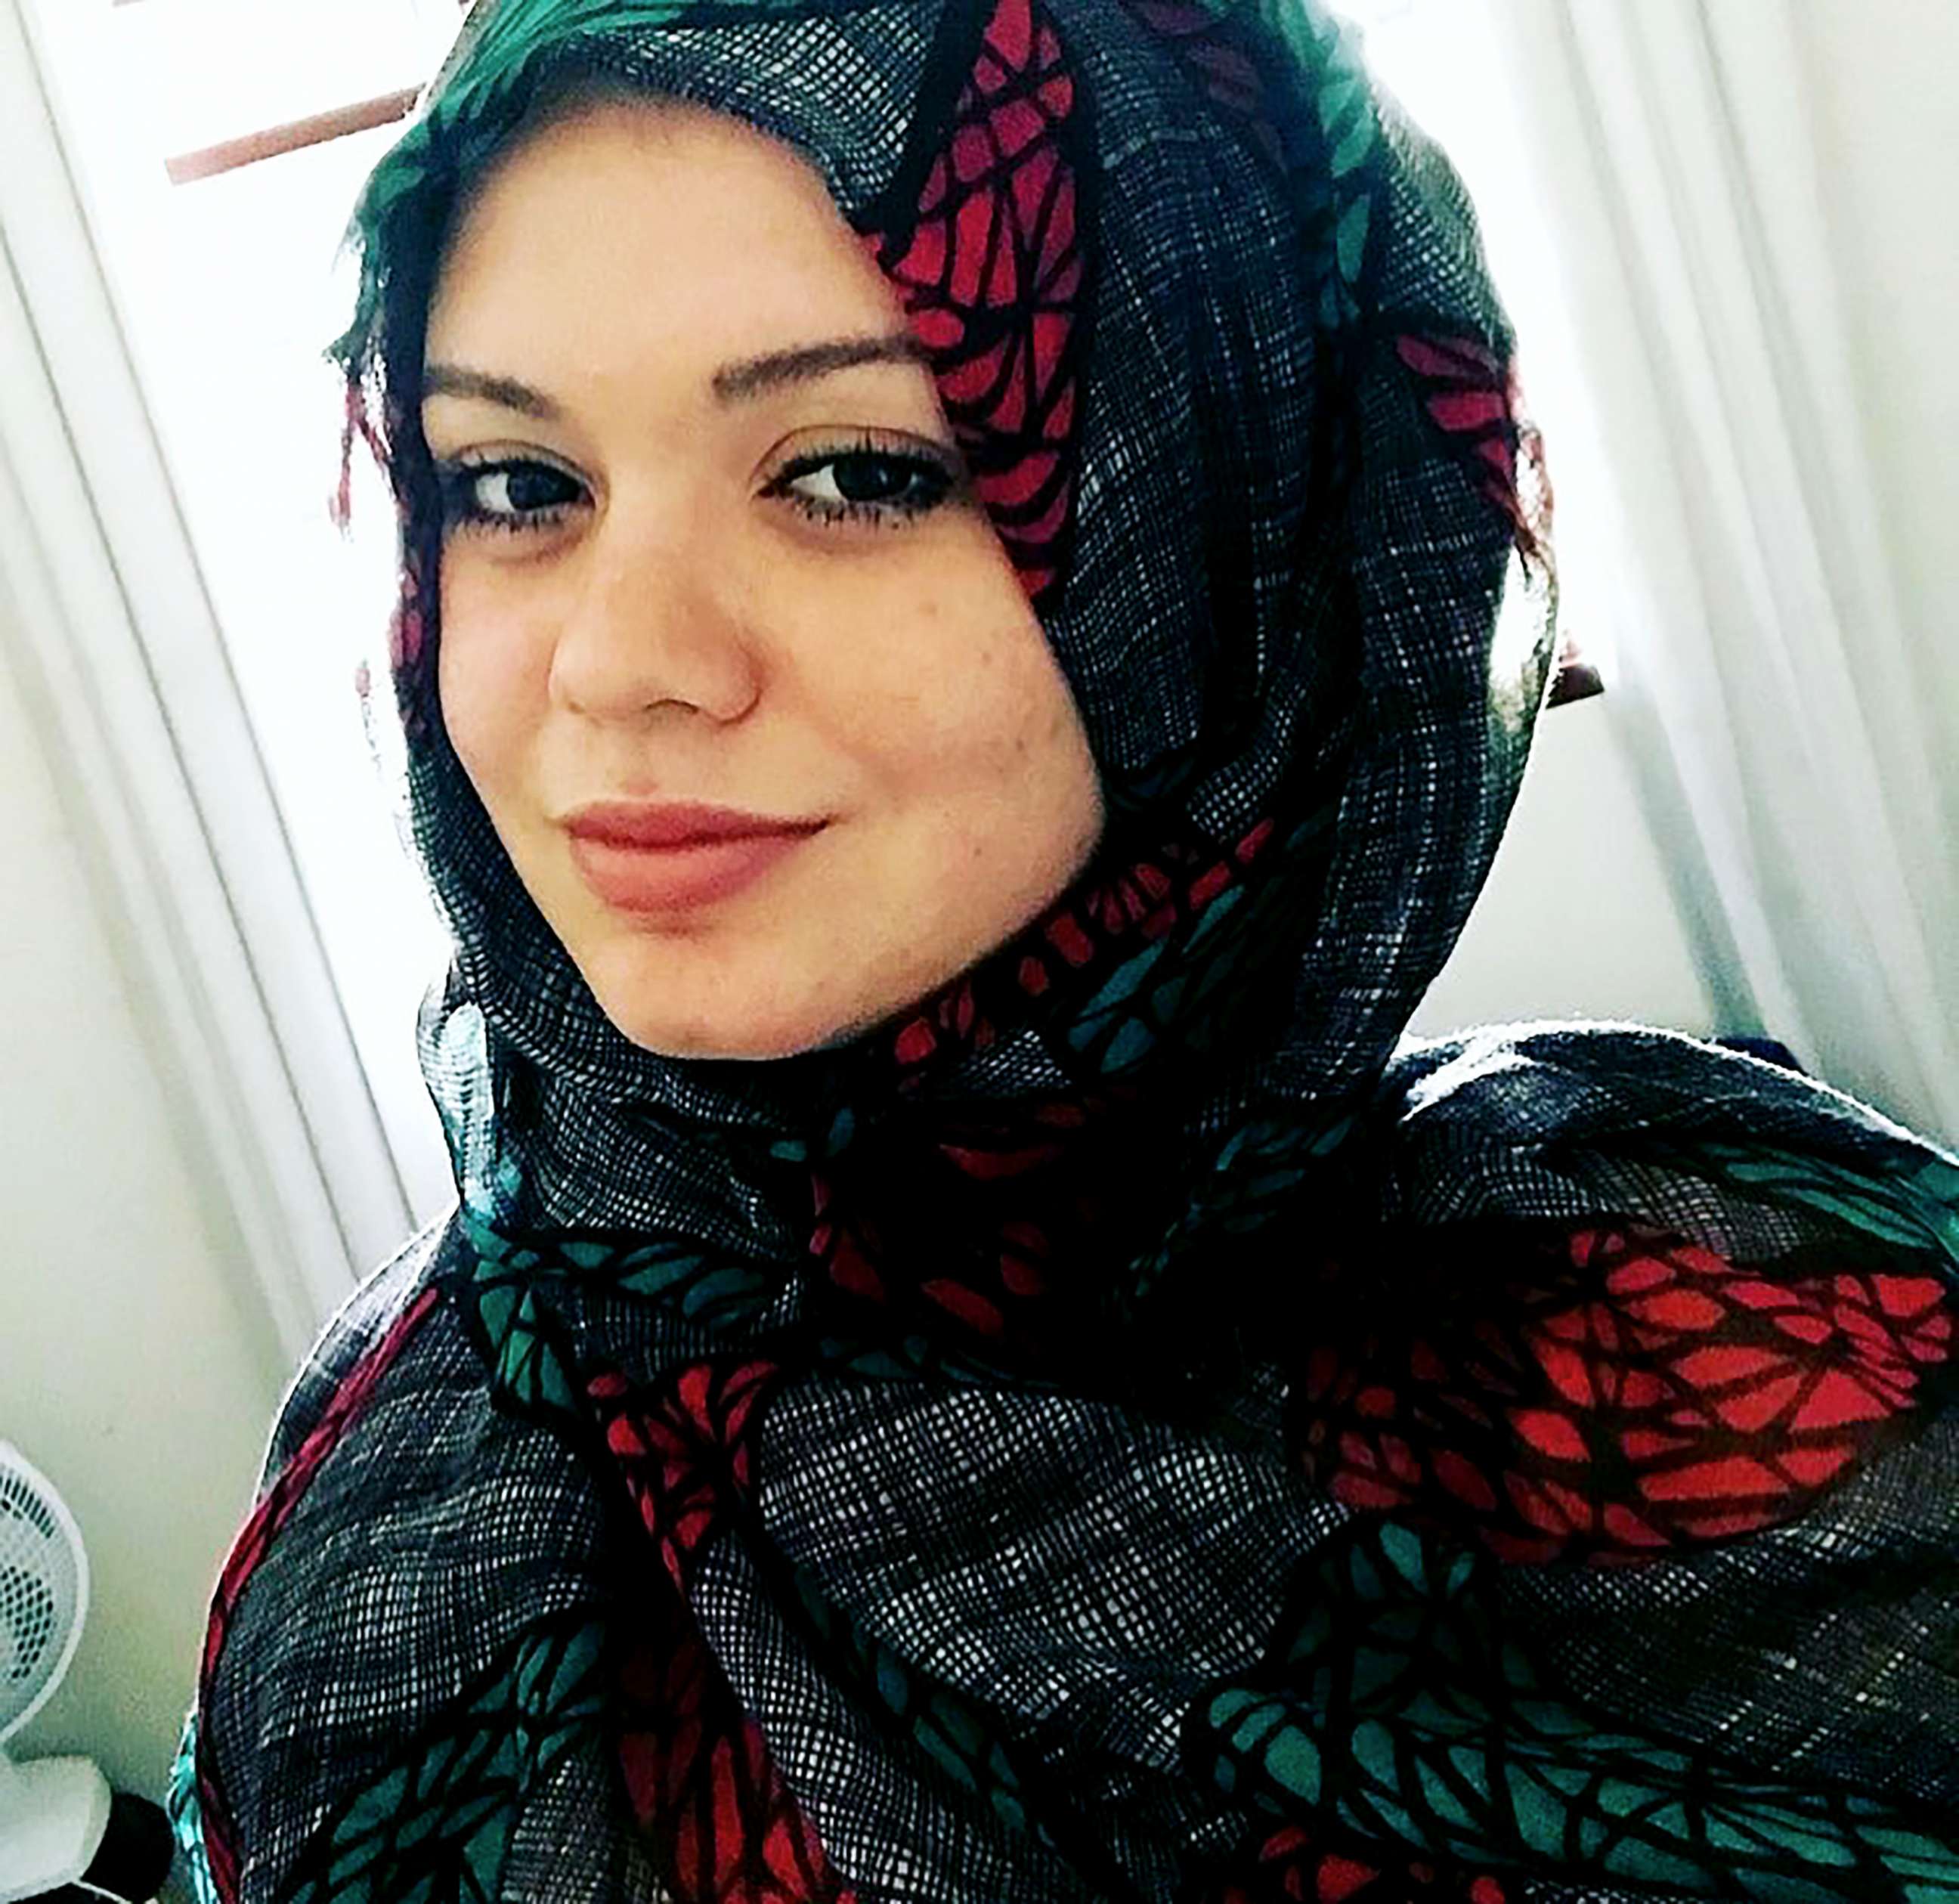 PHOTO: Zafred, a 19-year-old from Brazil, took part in the 30-Day Hijab challenge this year.